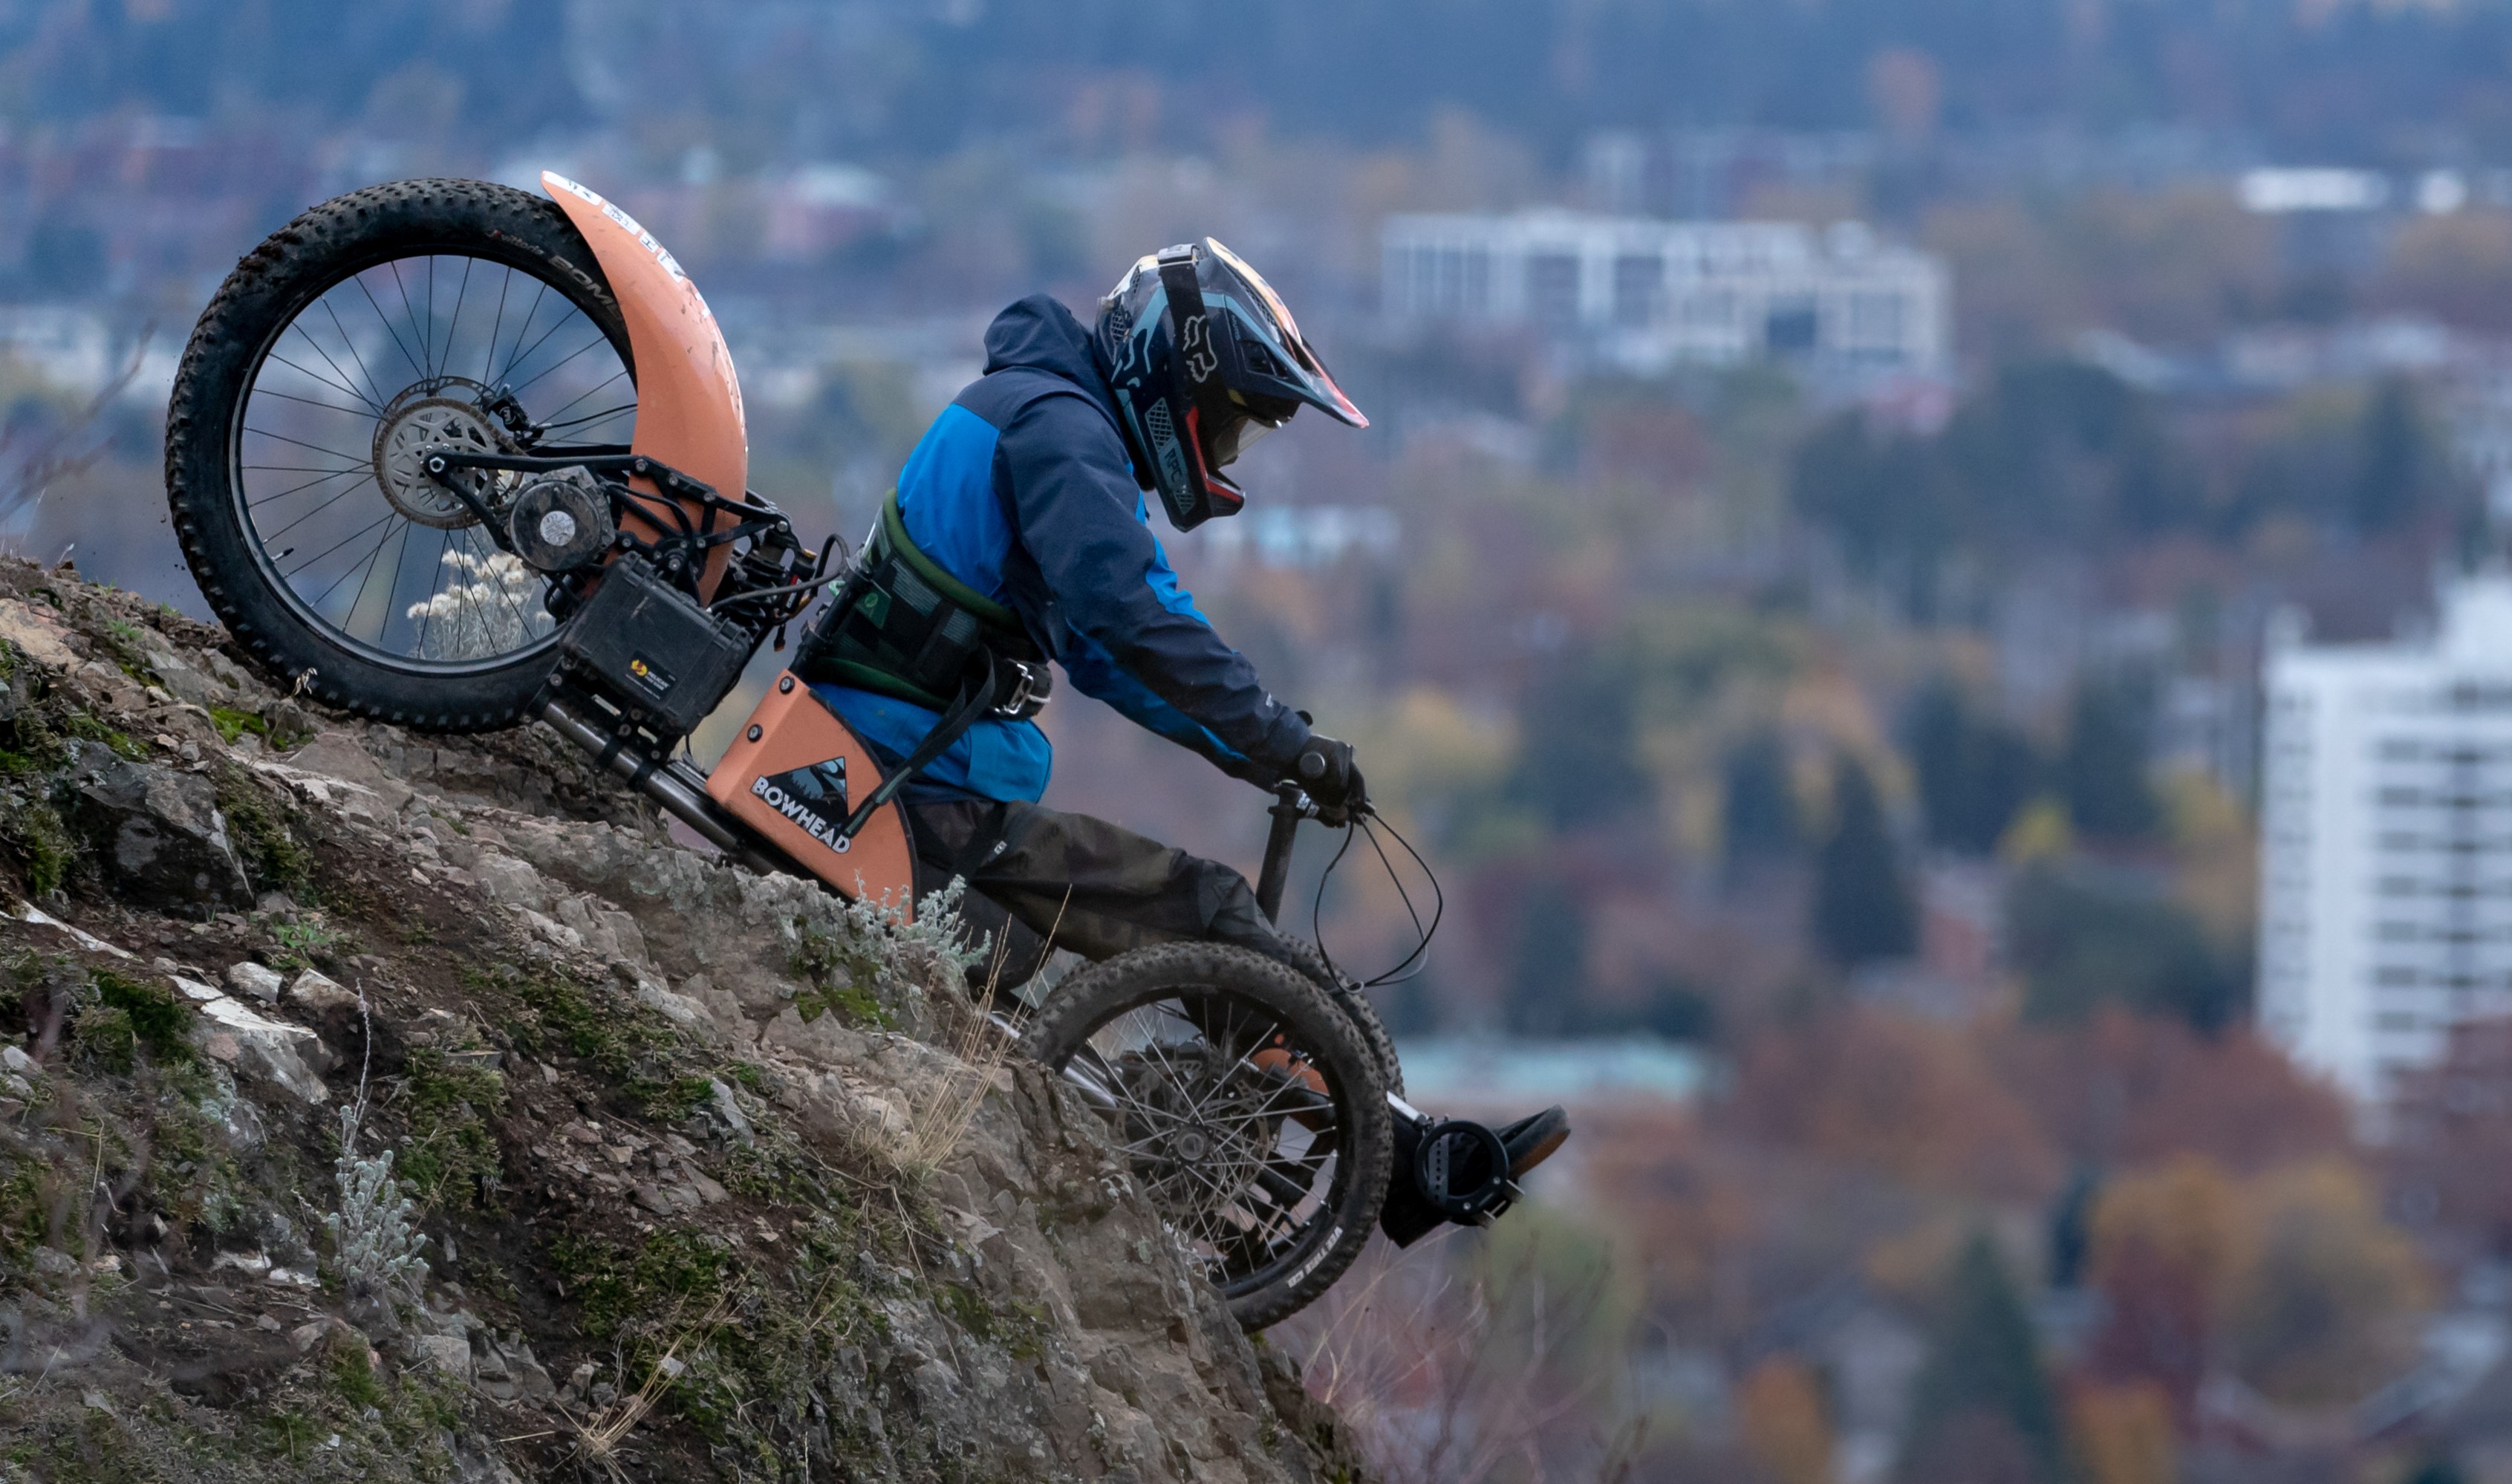 An adaptive bike leans at a dramatic 45-degree angle over the edge of a hill. The driver's face is obscured by a helmet.